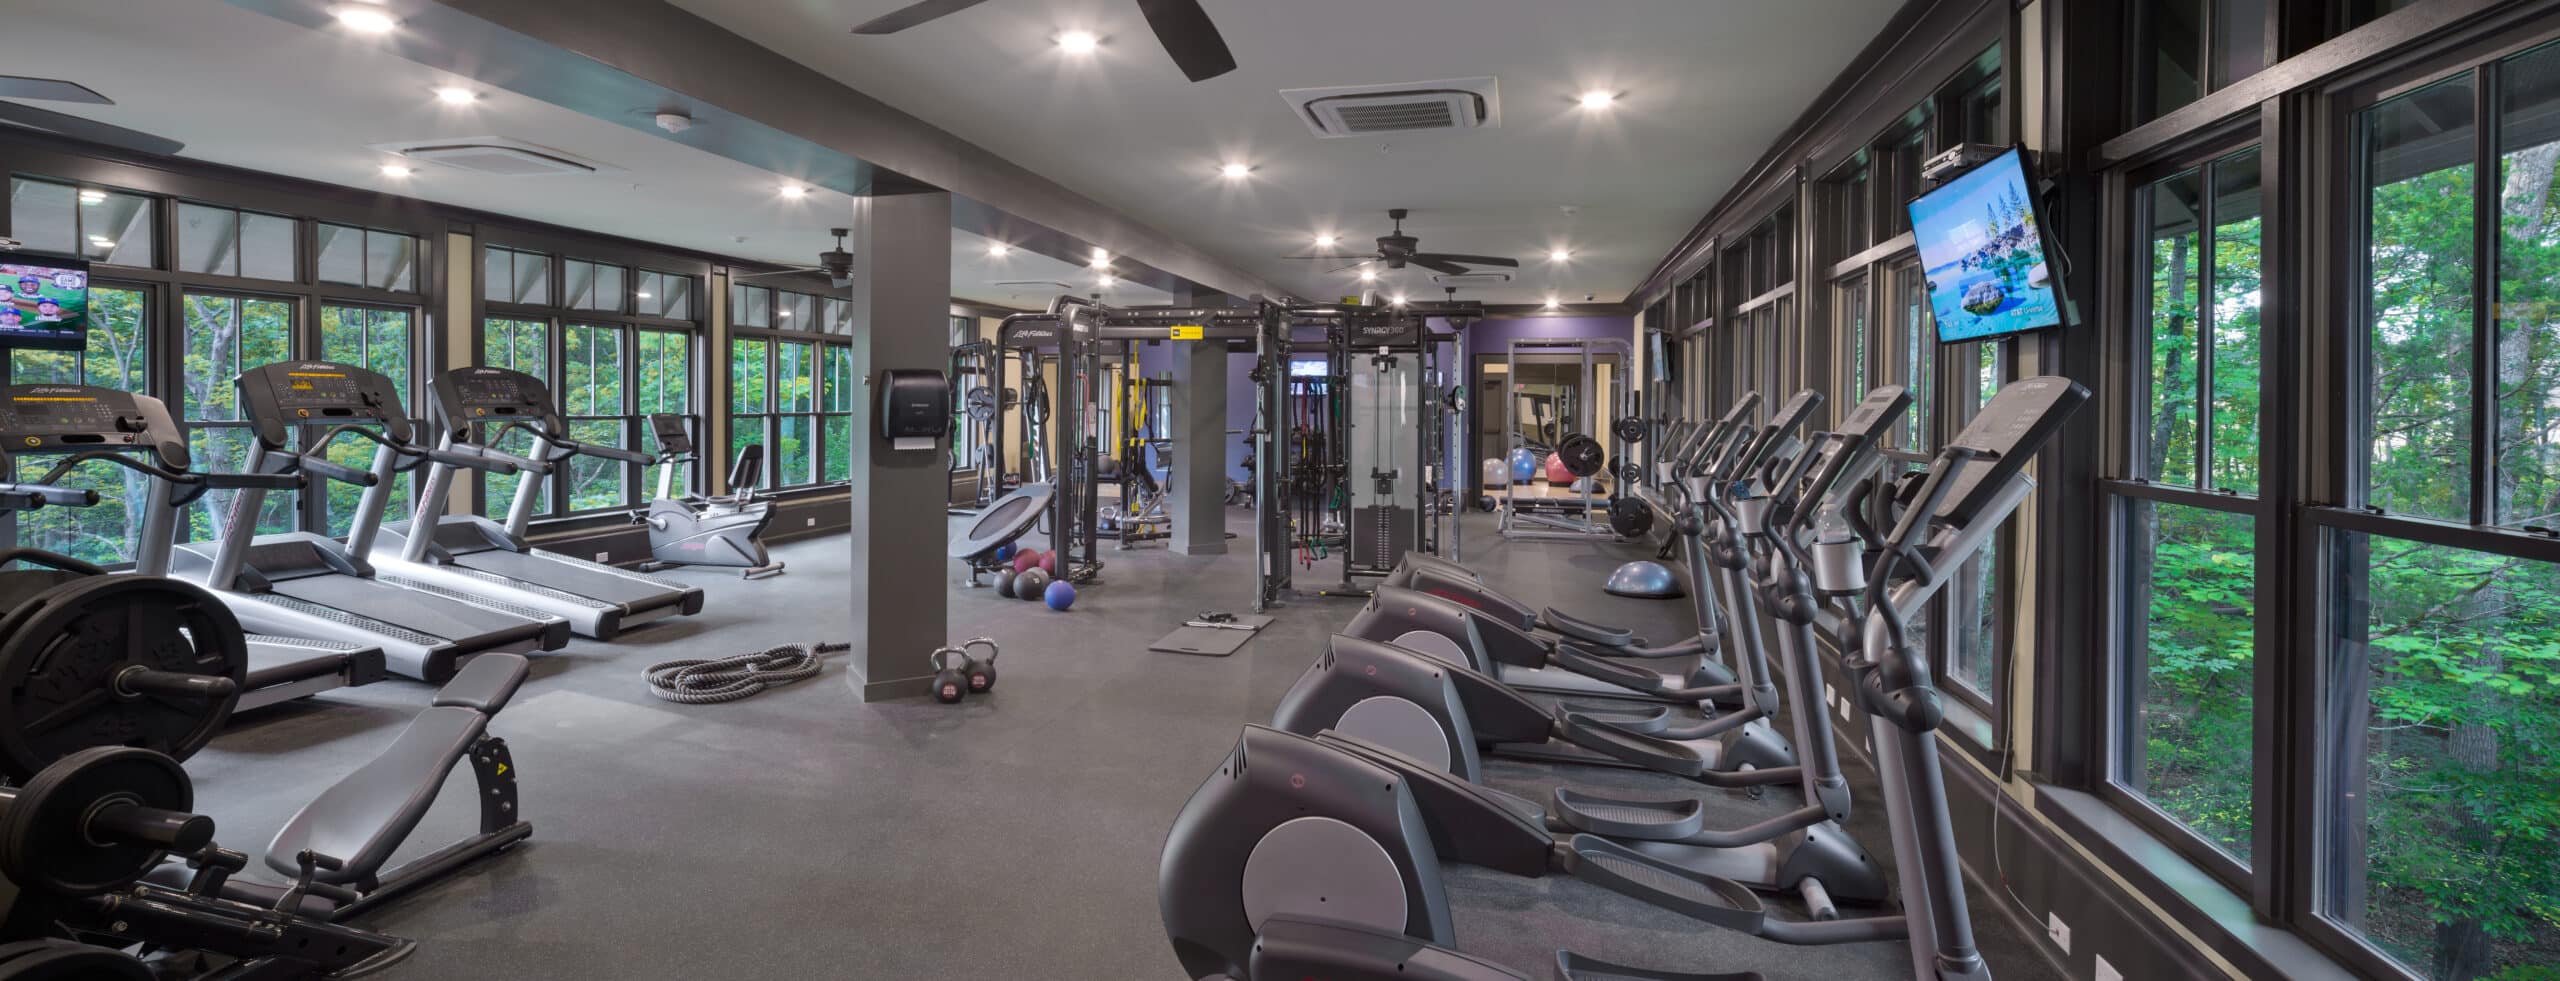 A gym with large windows and tread machines.